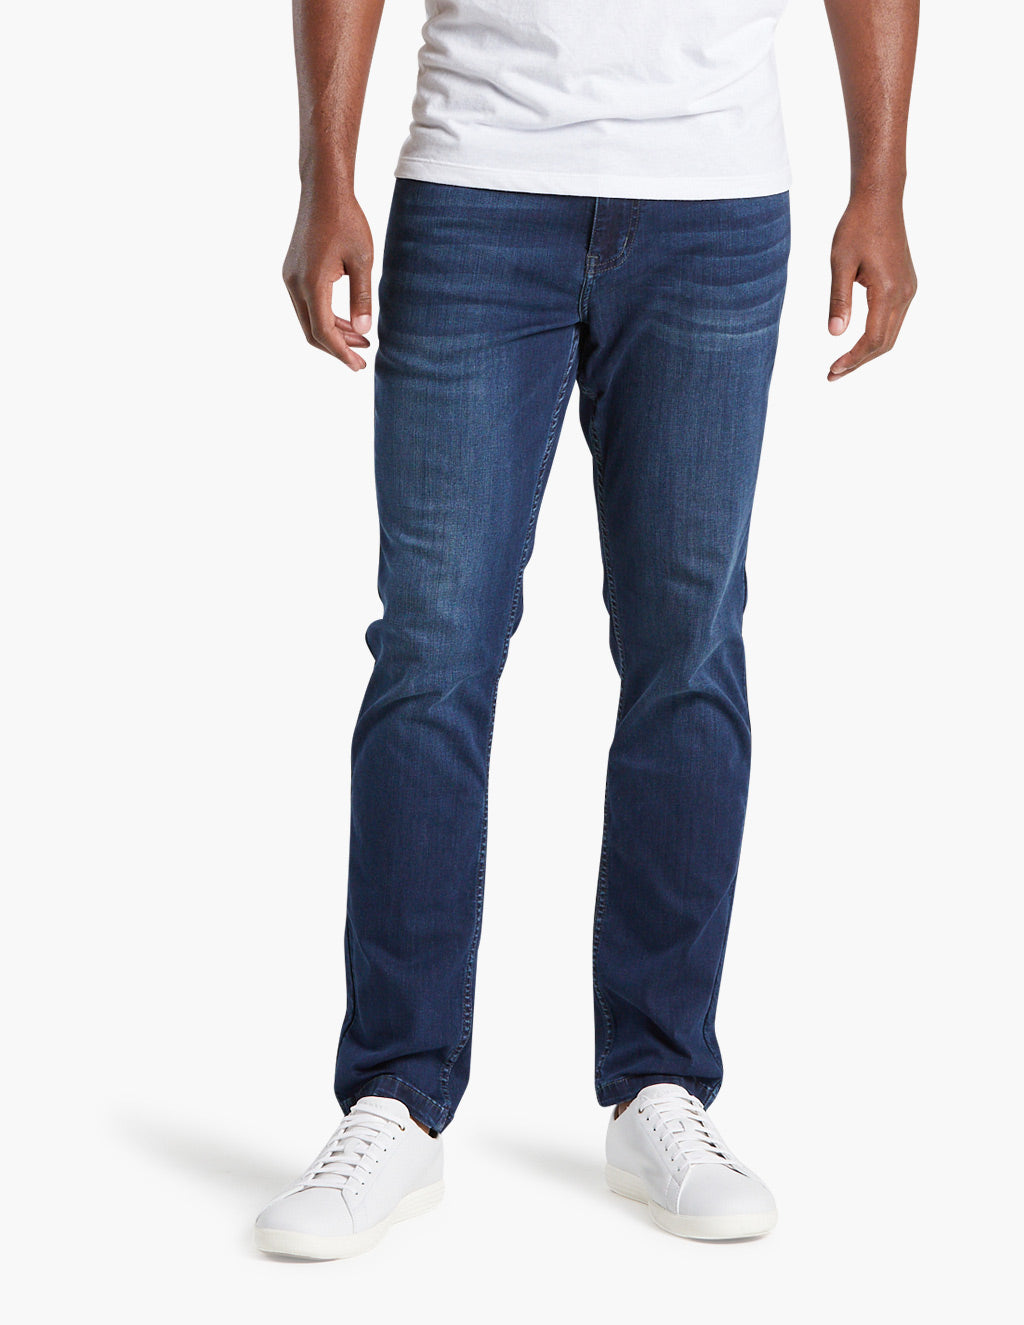 Men's Perfect Jeans (free shipping)